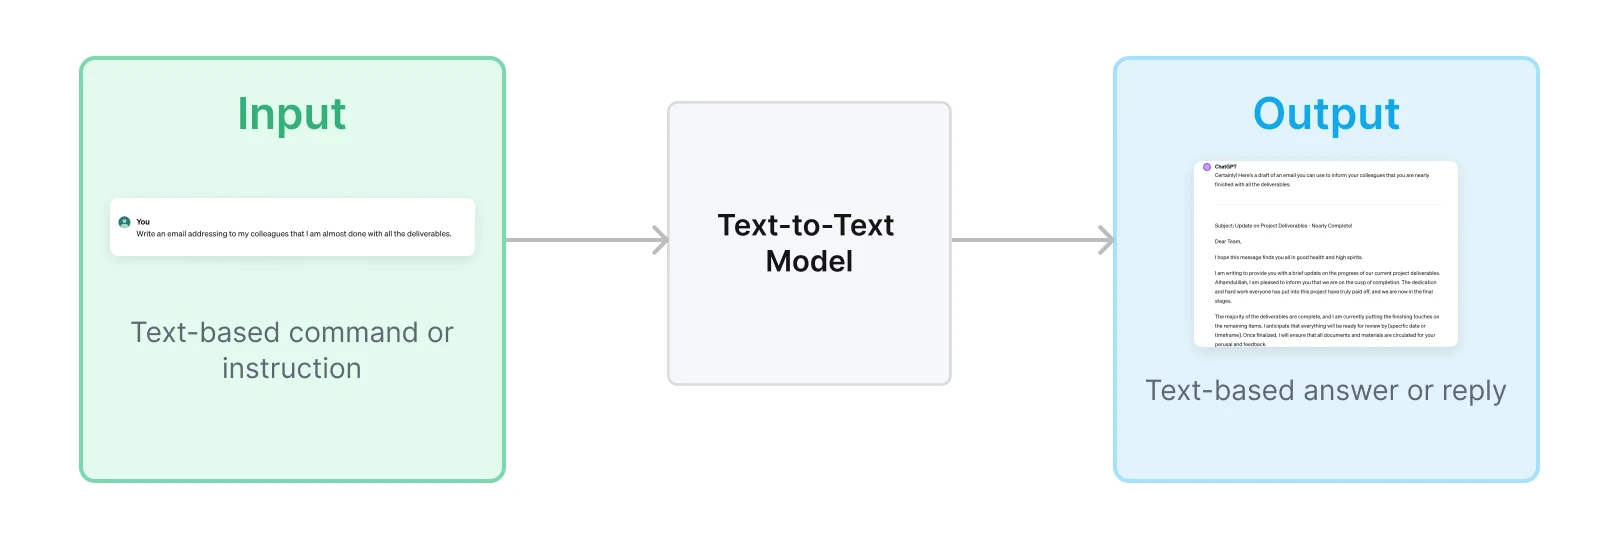 text to text model example